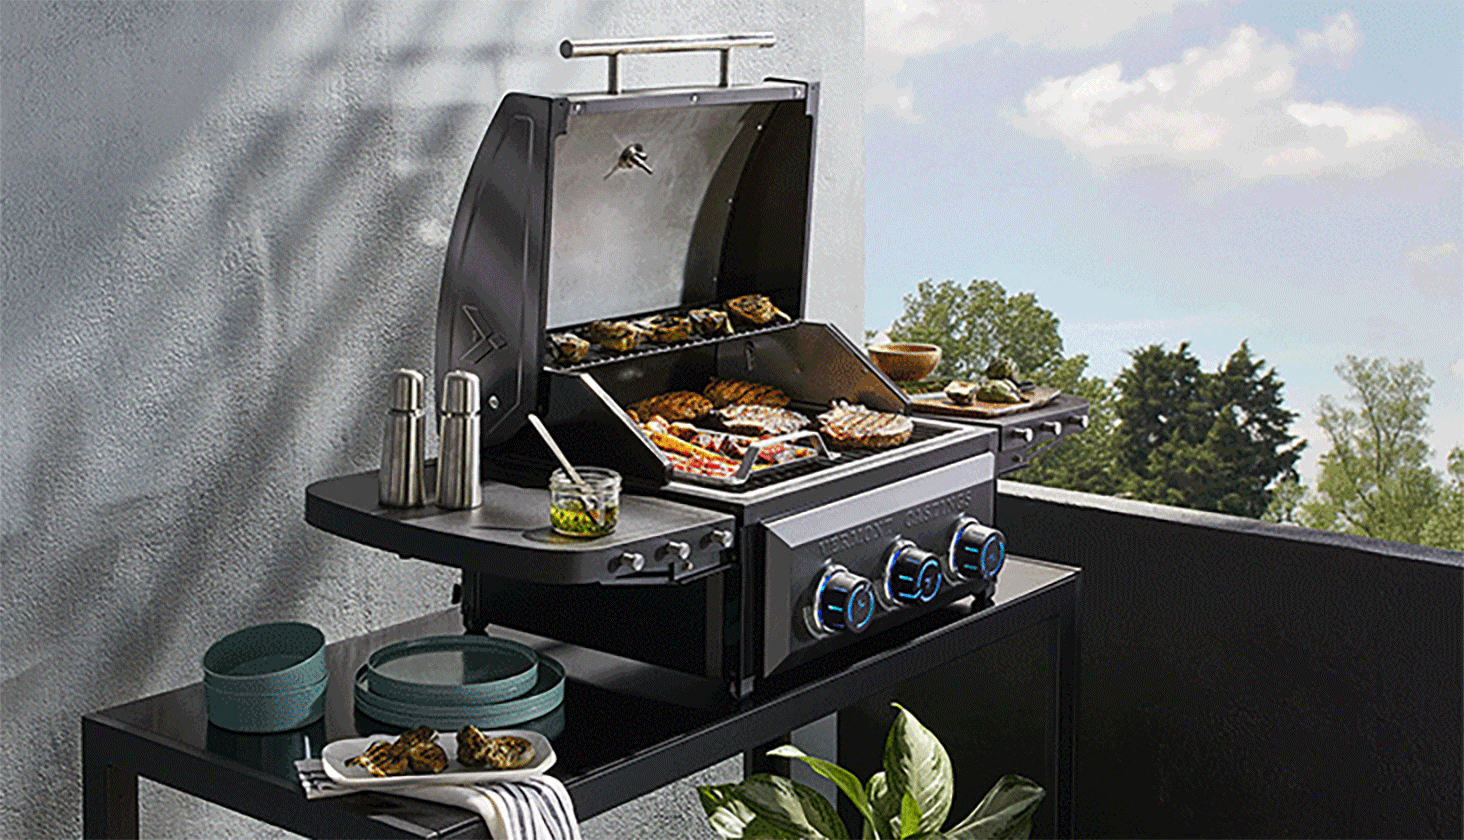 Vermont Castings Ascent 3-Burner Electric Balcony Grill on outdoor table with side panels open, grilling burgers.